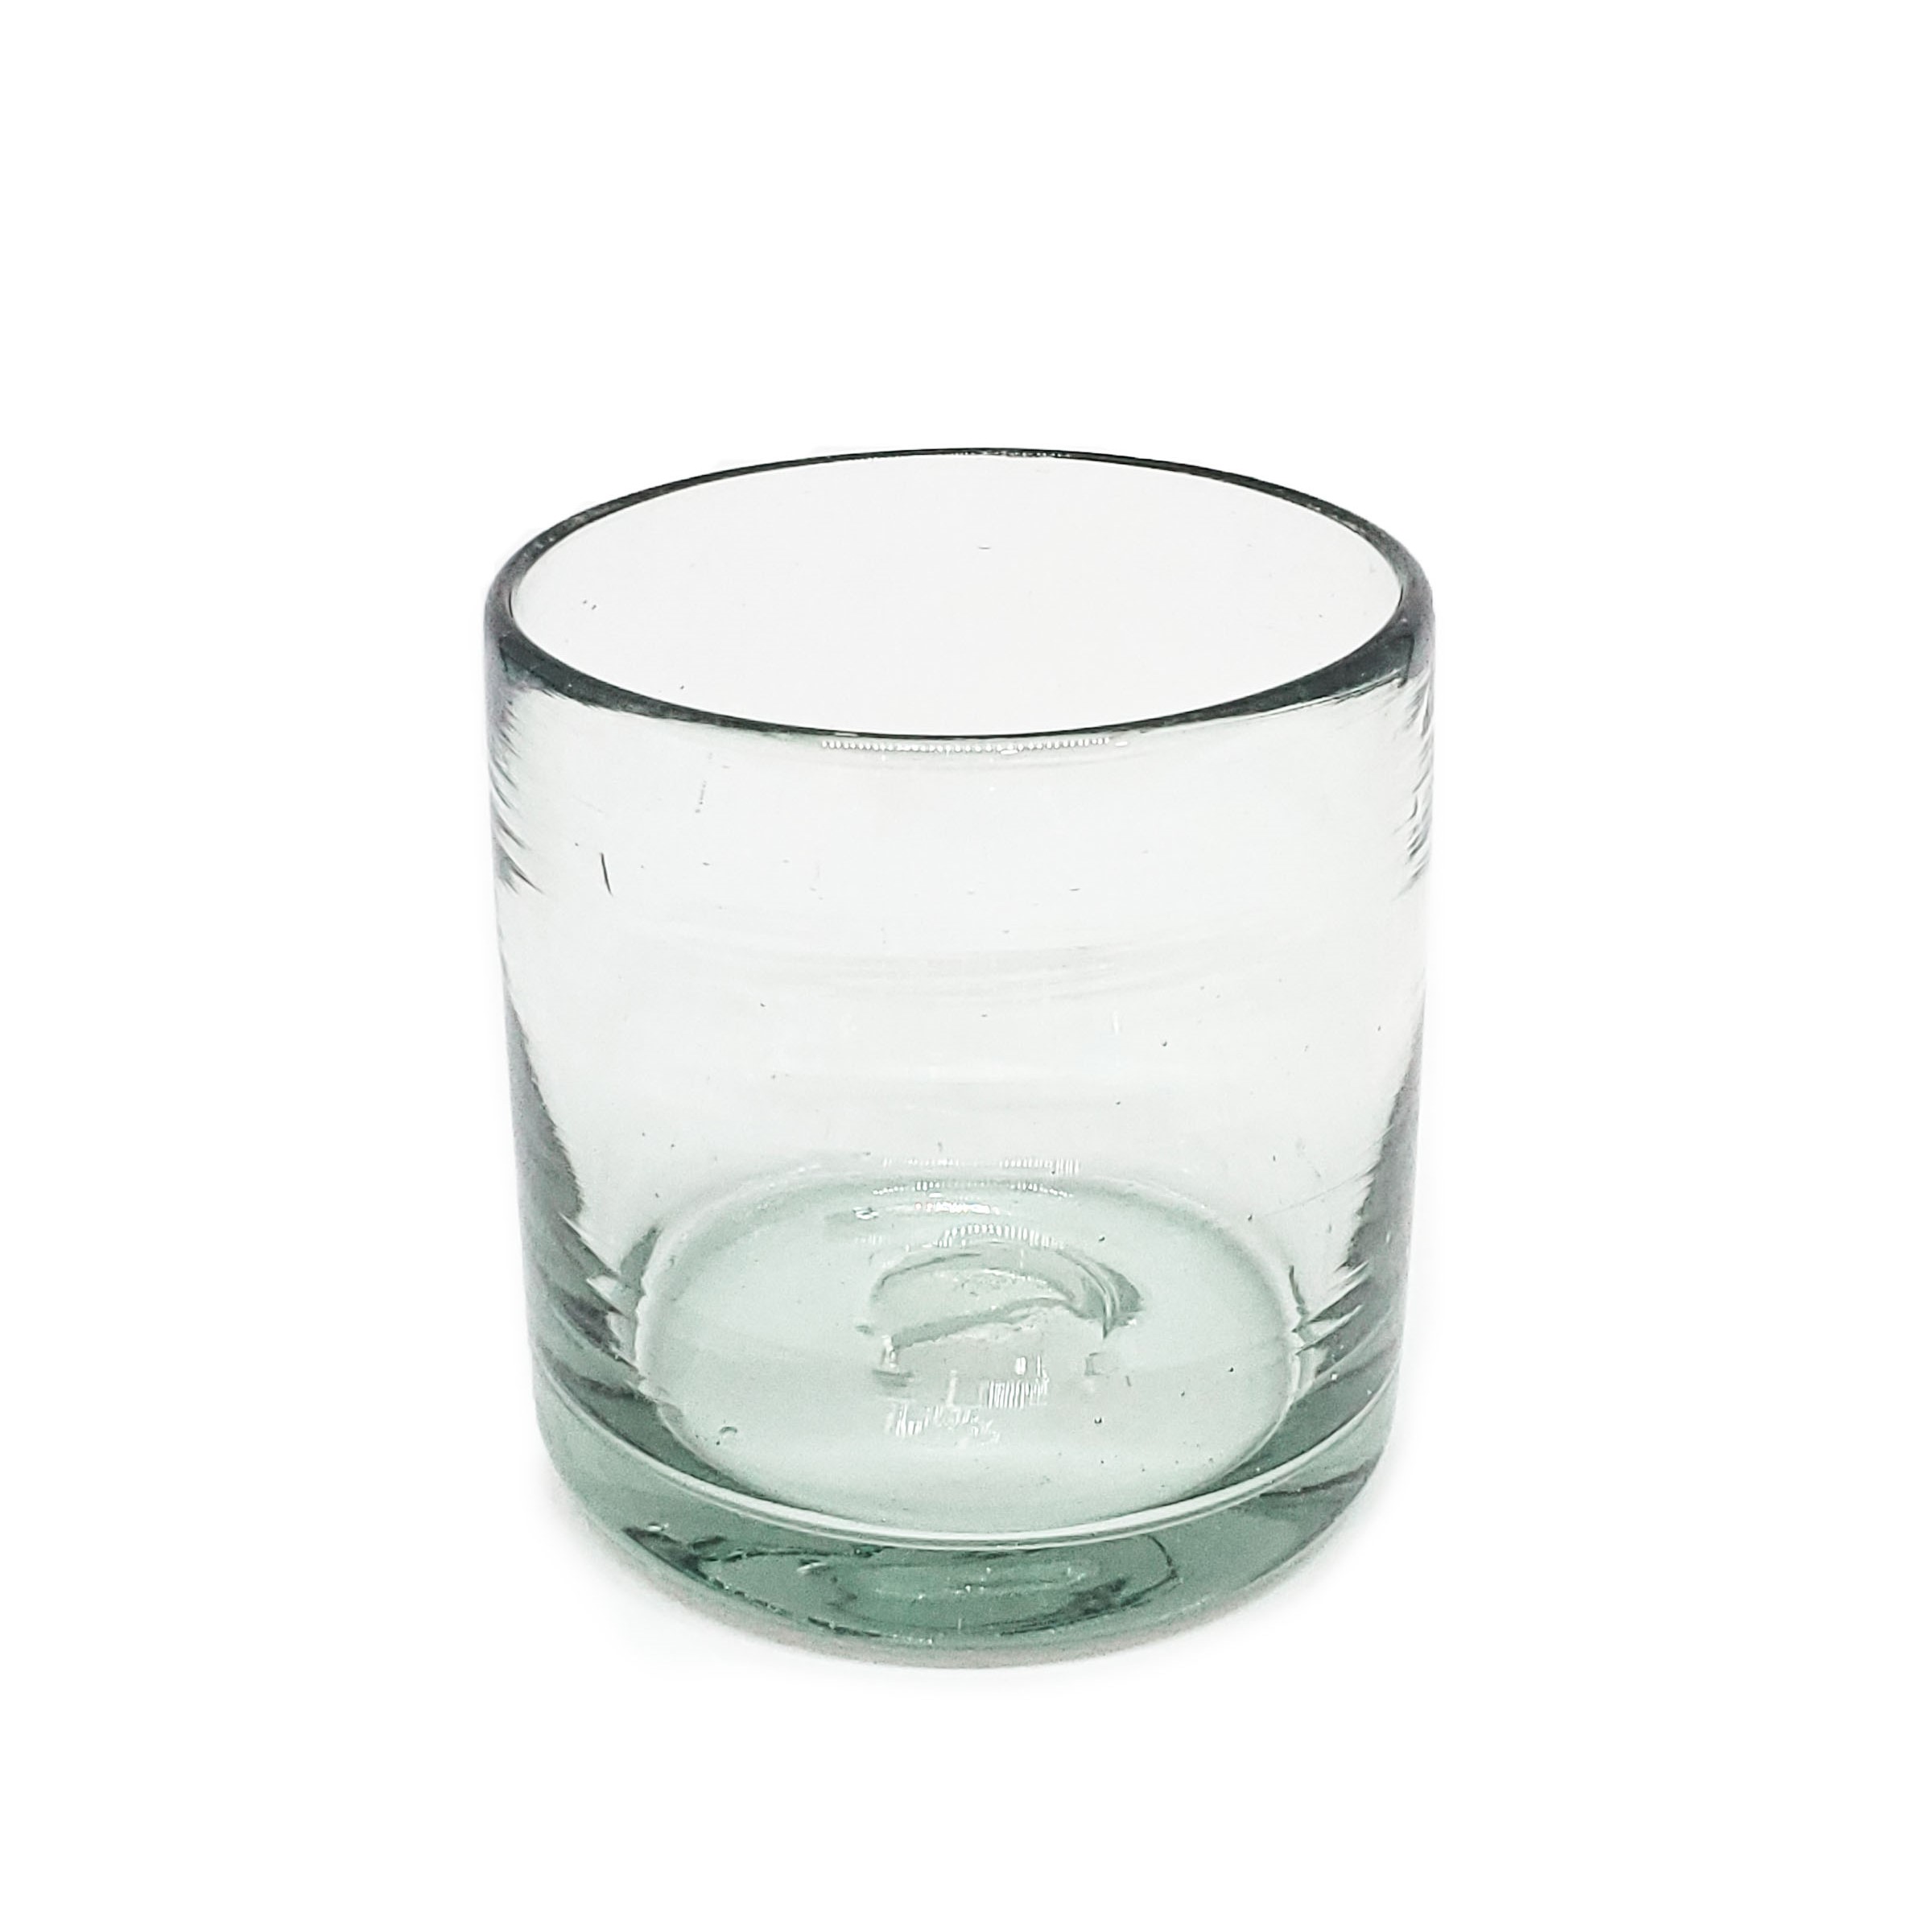 https://mexhandcraft.com/imgProducts/Clear%208%20oz%20DOF%20Rock%20Glasses%20(set%20of%206)%20(7).jpg